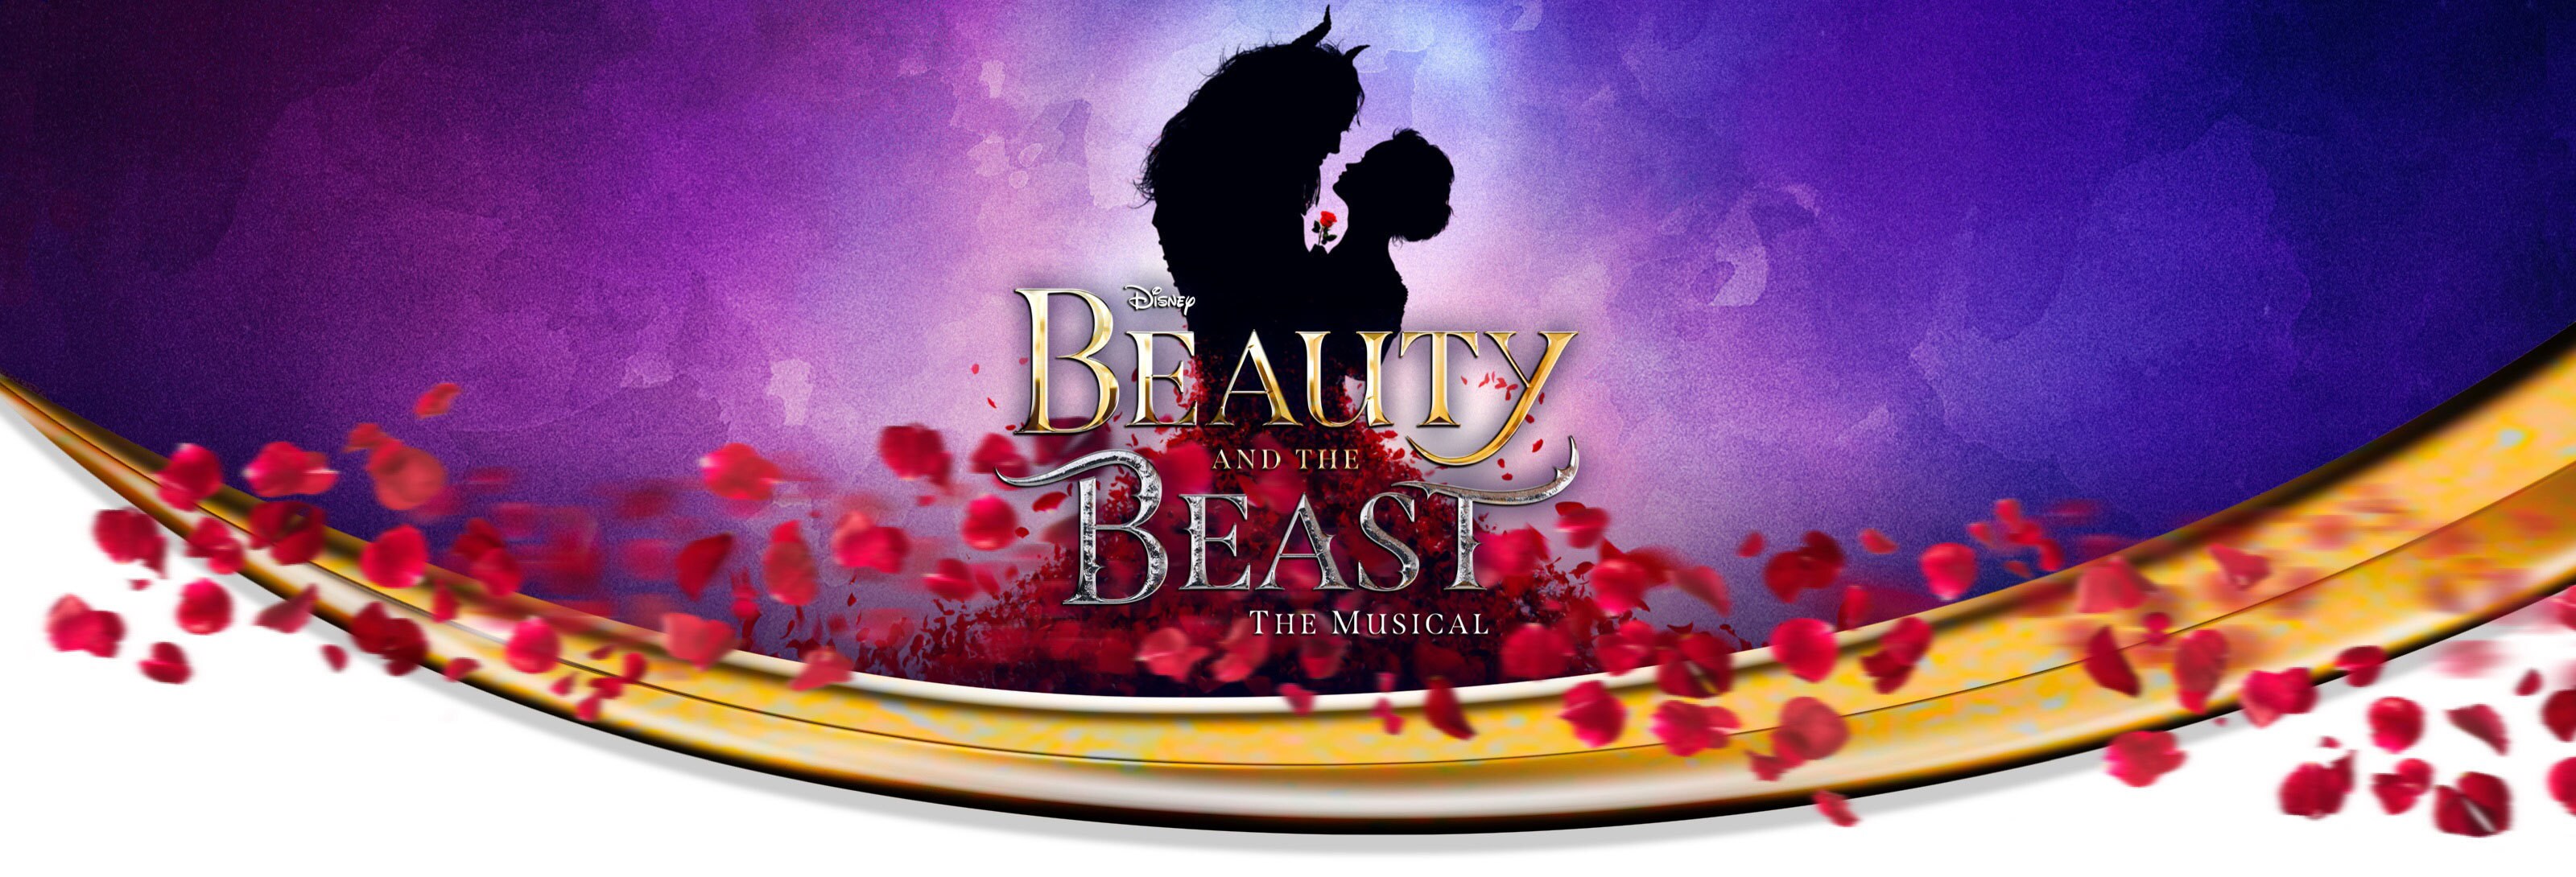 Beauty and the Beast silhouette with petal decoration